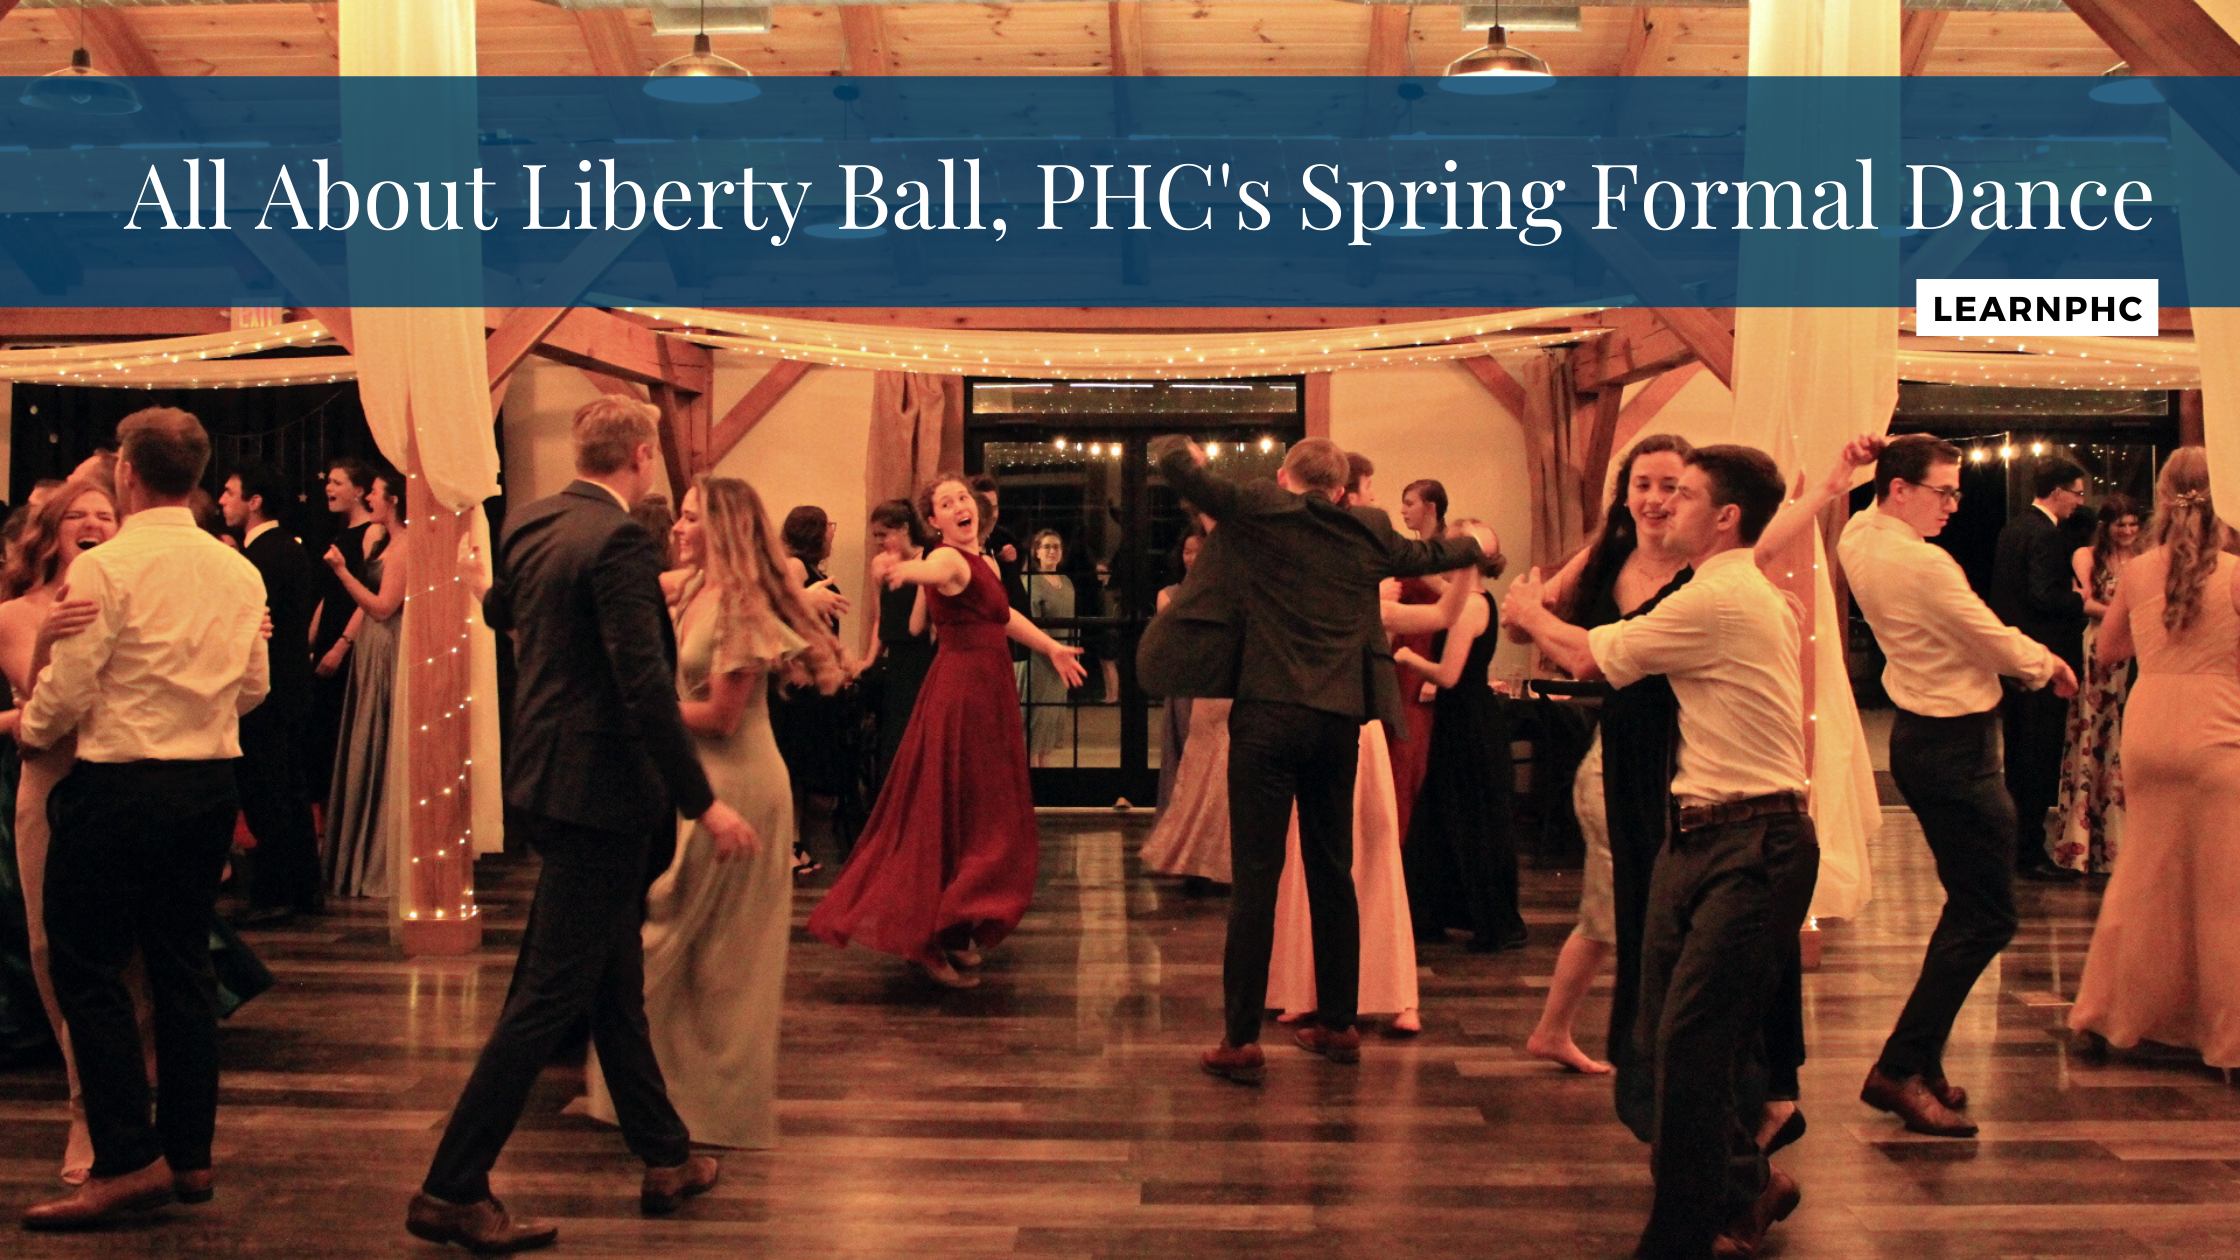 All About Liberty Ball, PHC's Spring Formal Dance